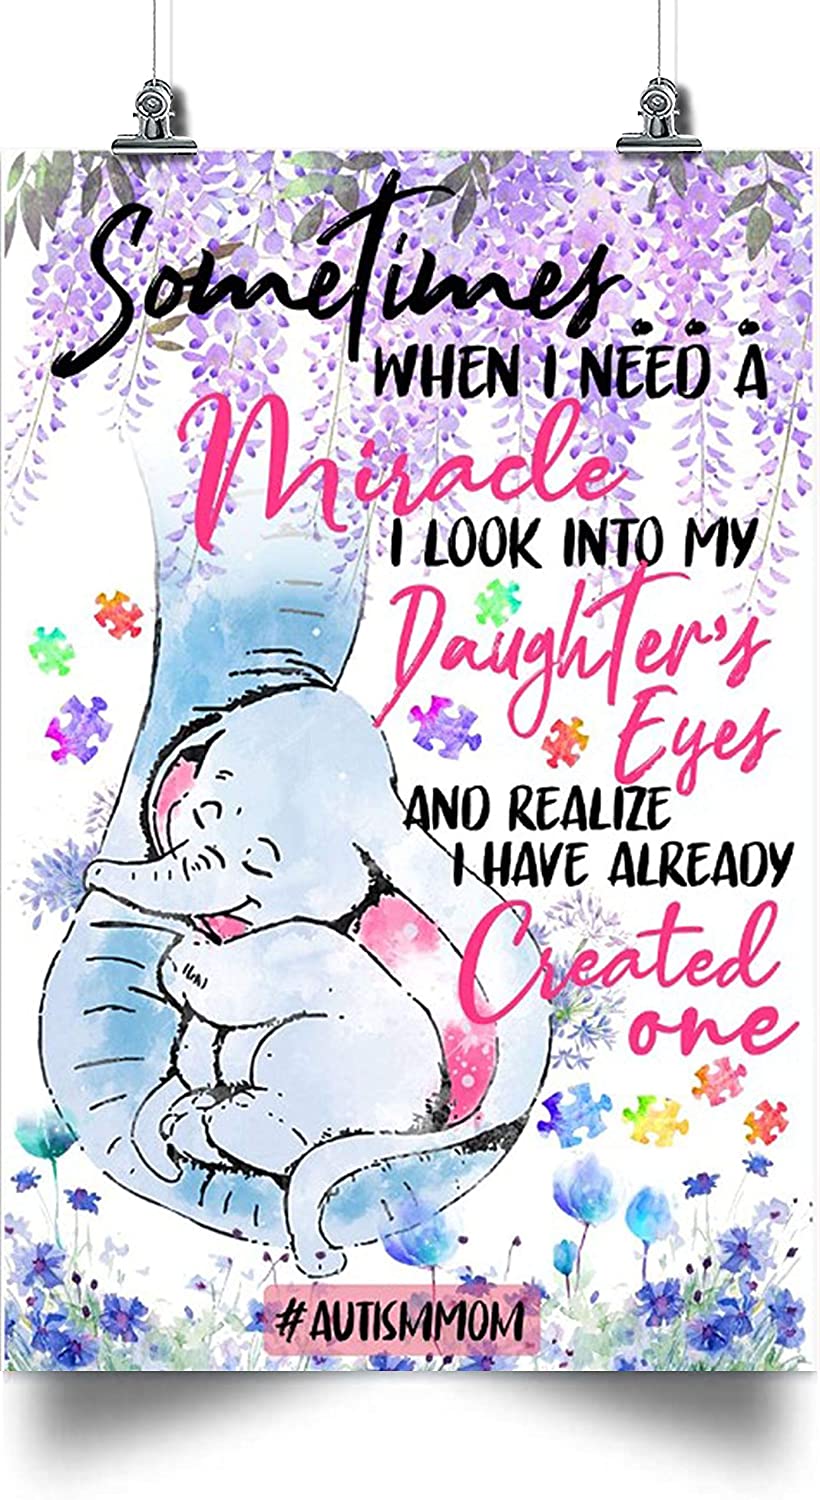 Autism MOM Poster – Elephant Poster – Home Decoration Poster, Wall Poster, Home and Room Decoration, Gifts for Friends and Relatives, Souvenirs.